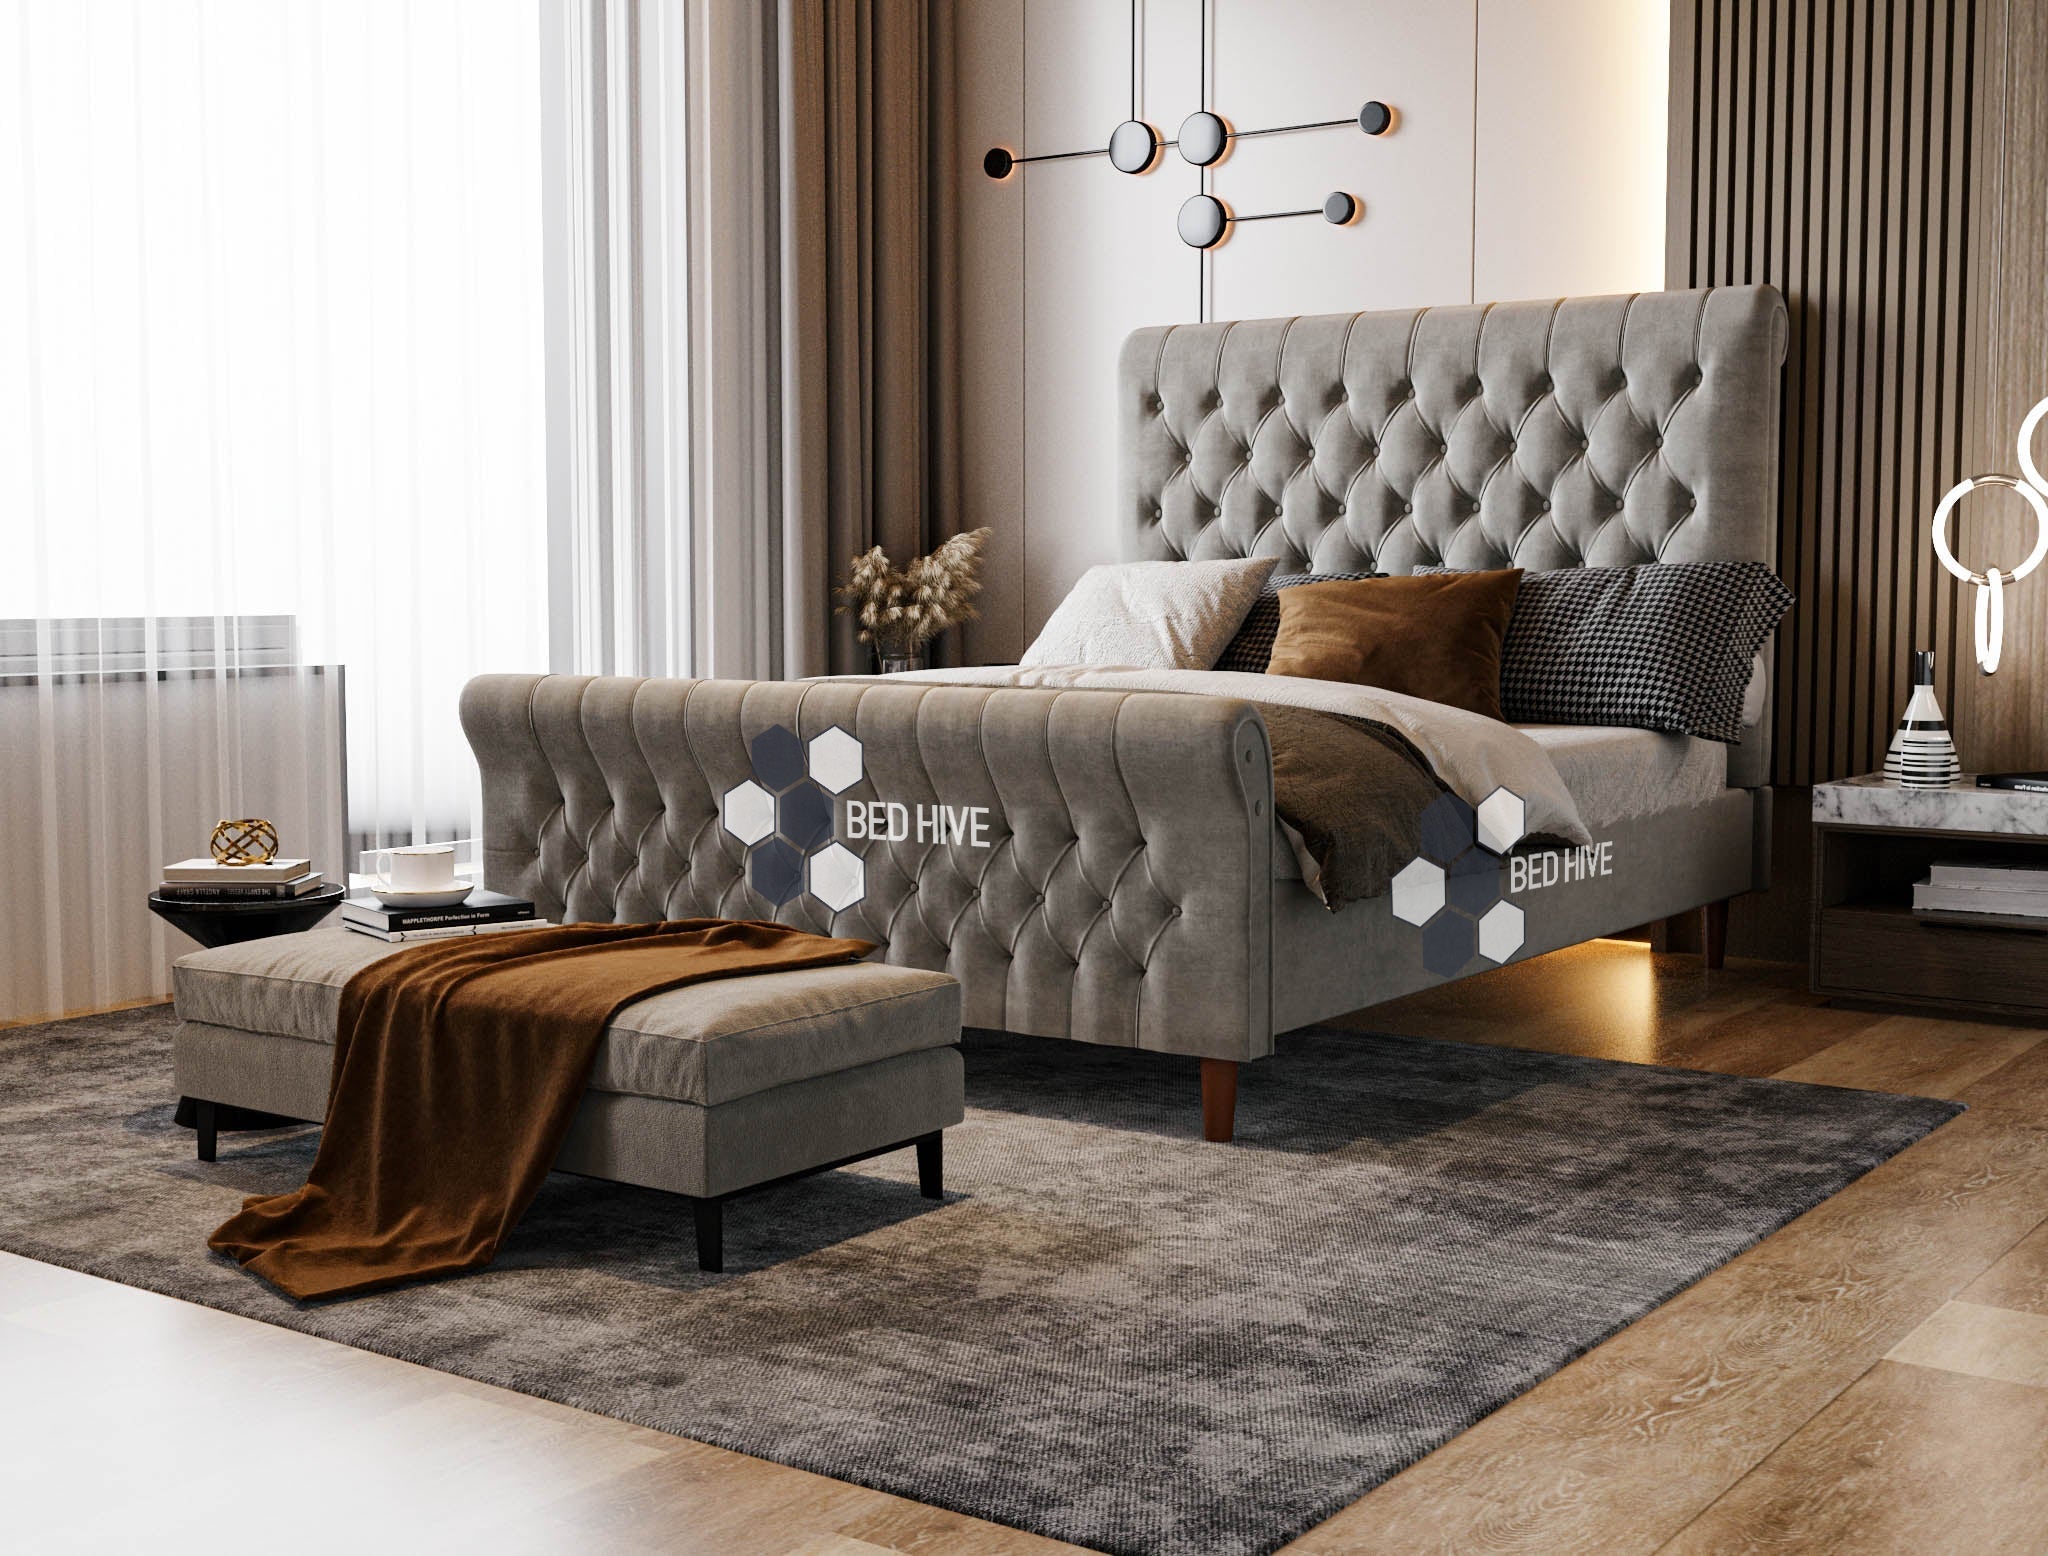 Bellance Chesterfield Sleigh Bed - Bed Hive, sleigh scroll bed, chesterfield upholstered bed, new bed, fabric bed, upholstered bed, bedframe, grey bed